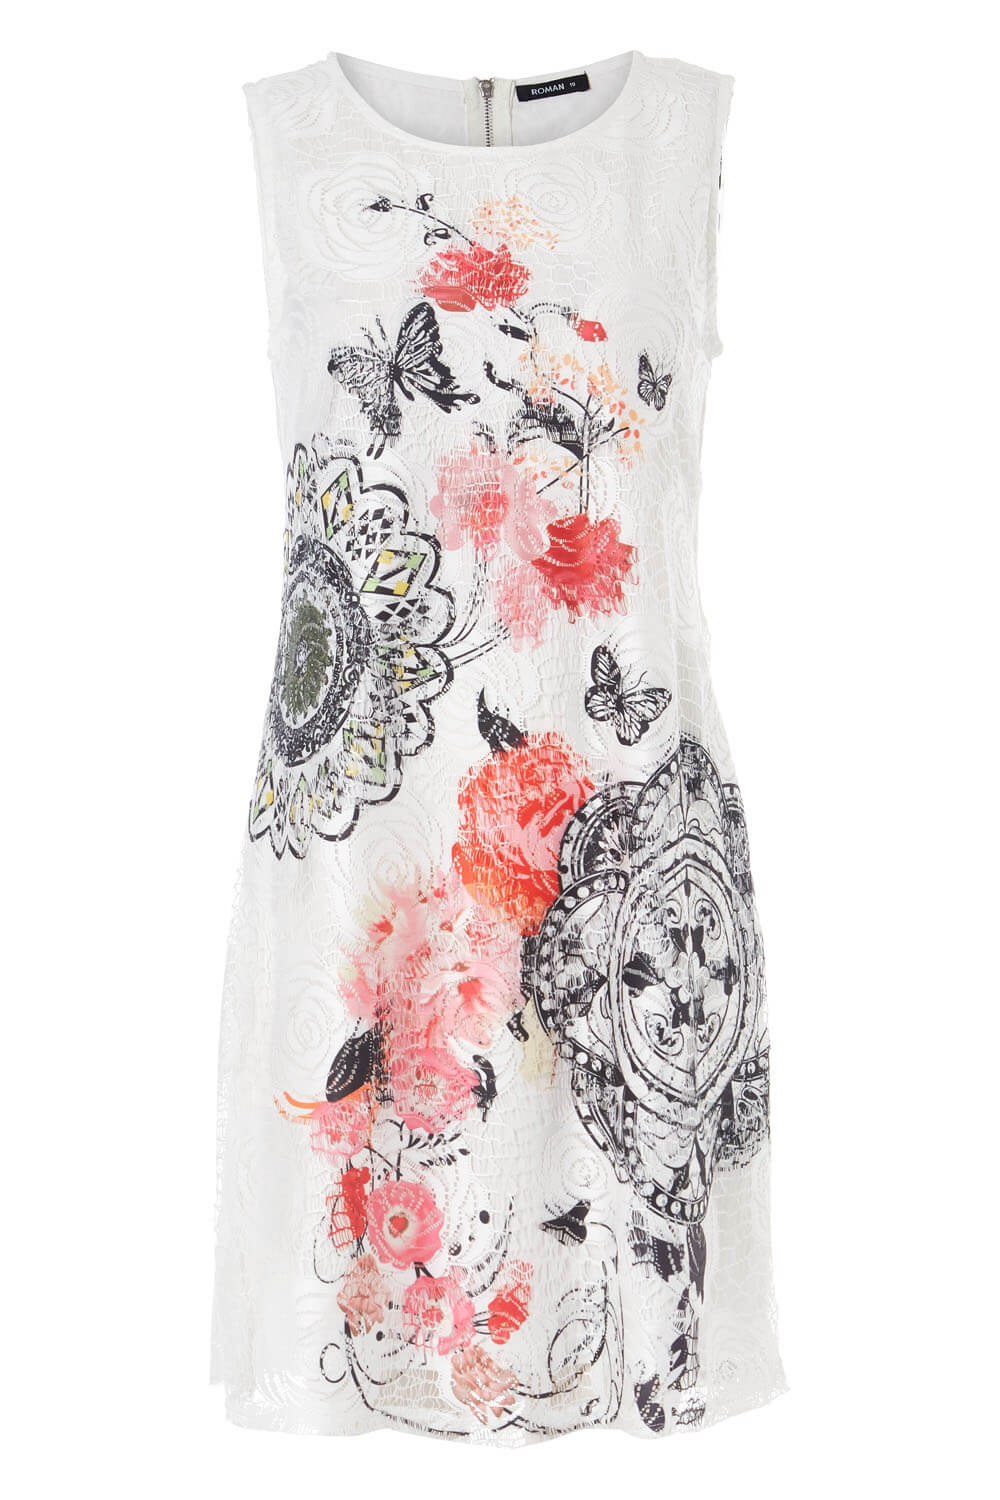 Ivory  Mixed Floral Butterfly Print Lace Shift Dress, Image 5 of 5